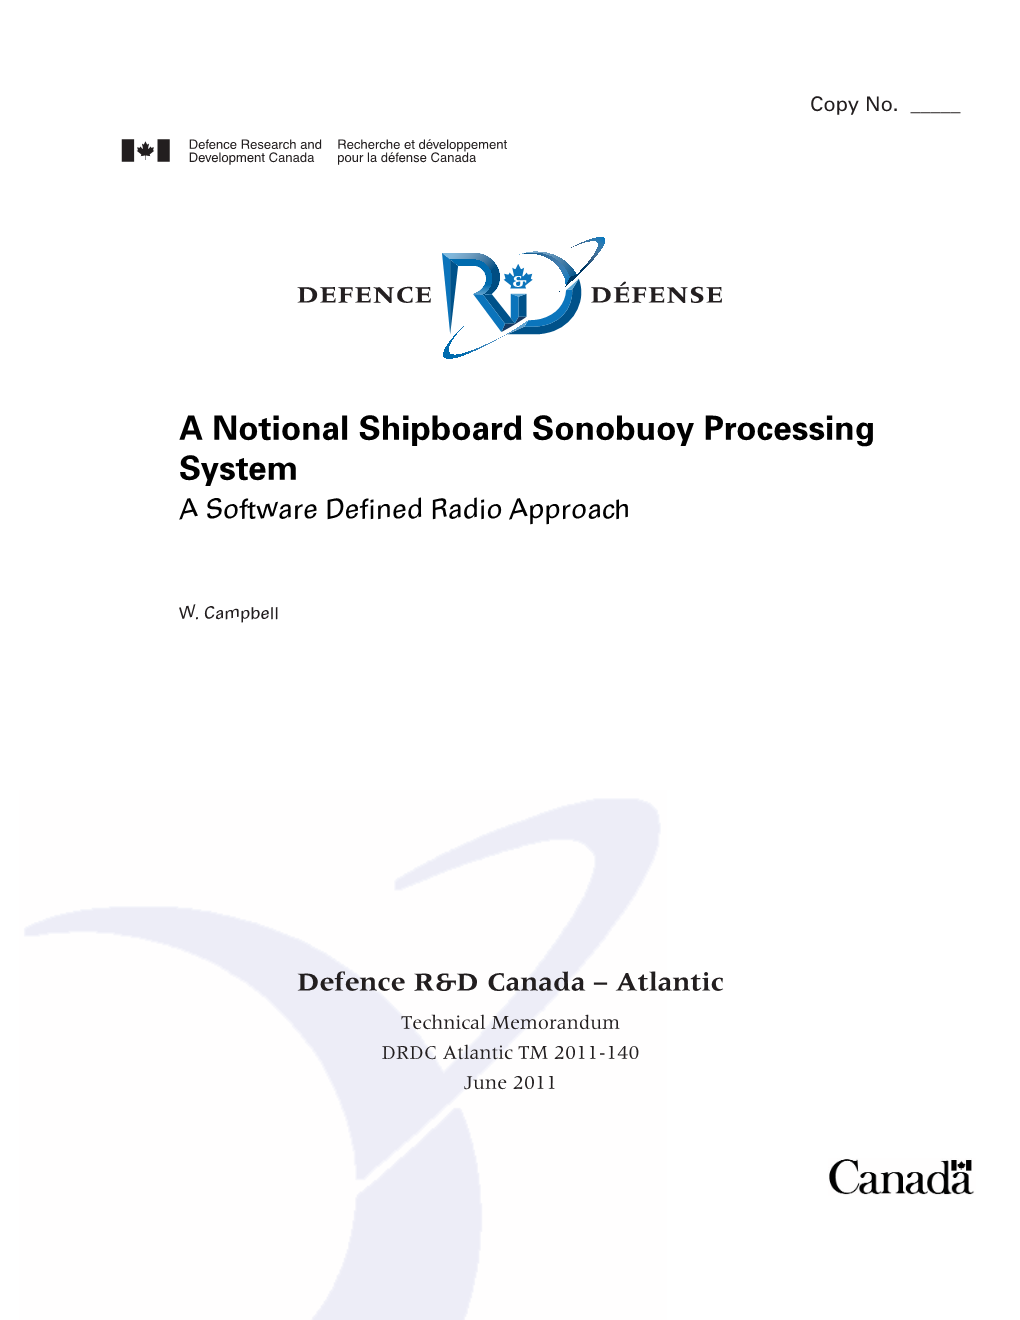 A Notional Shipboard Sonobuoy Processing System a Software Defined Radio Approach